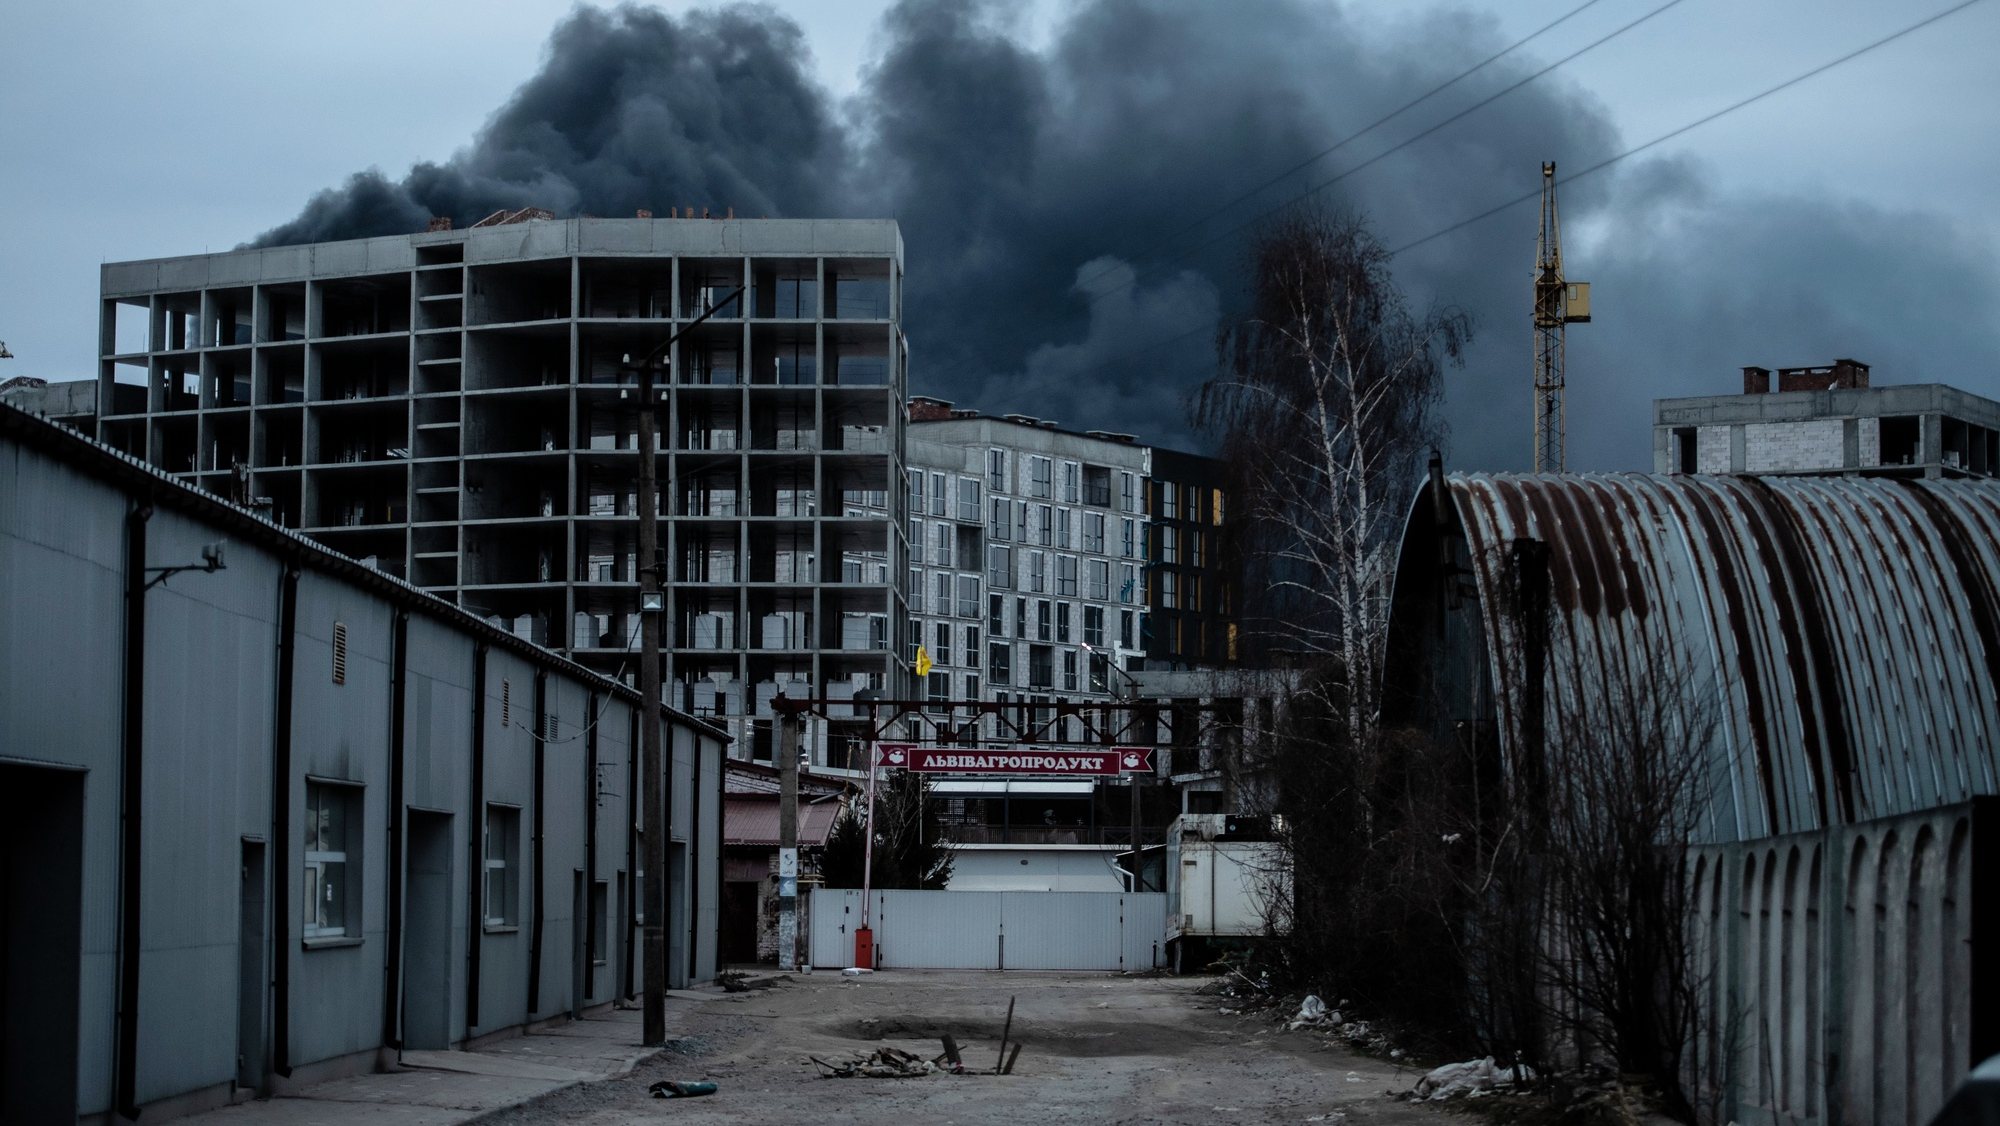 epa09851914 Smoke rises outside Lviv after a Russian airstrike, in Lviv, western Ukraine, 26 March 2022. Lviv Oblast governor Kozytskiy in a statement said three explosions were heard near Kryvchytsia and urged citizens to not reveal the locations on social media. On 24 February Russian troops had entered Ukrainian territory in what the Russian president declared a &#039;special military operation&#039;, resulting in fighting and destruction in the country, a huge flow of refugees, and multiple sanctions against Russia.  EPA/Wojtek Jargilo POLAND OUT